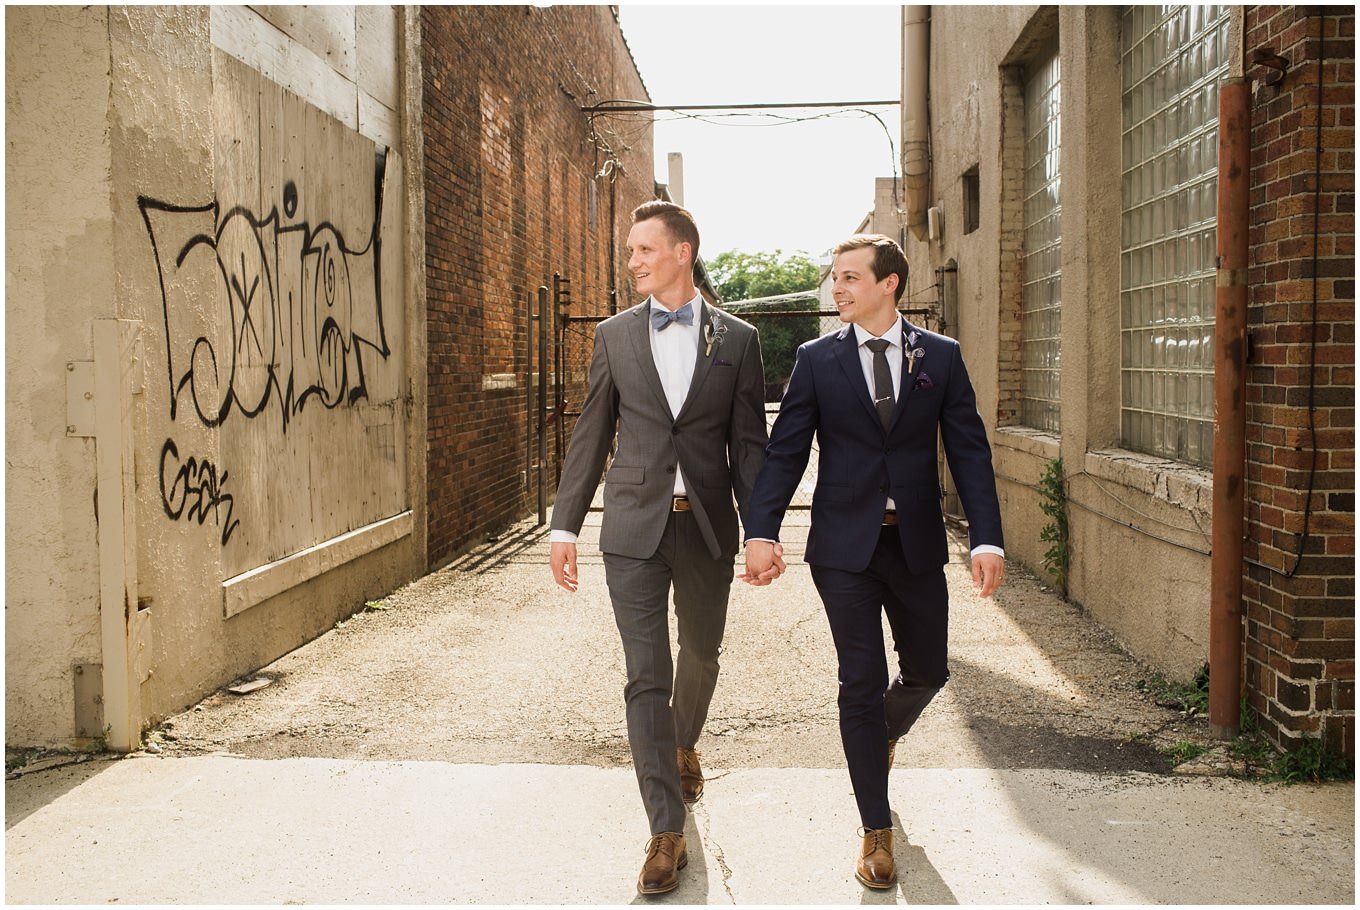 adam lowe photography, wedding, columbus, ohio, pride, gay, tom and terry, smith bros, dock 580, the loft, downtown, stylish, pursuit, ecoflora, groom and groom, grooms,